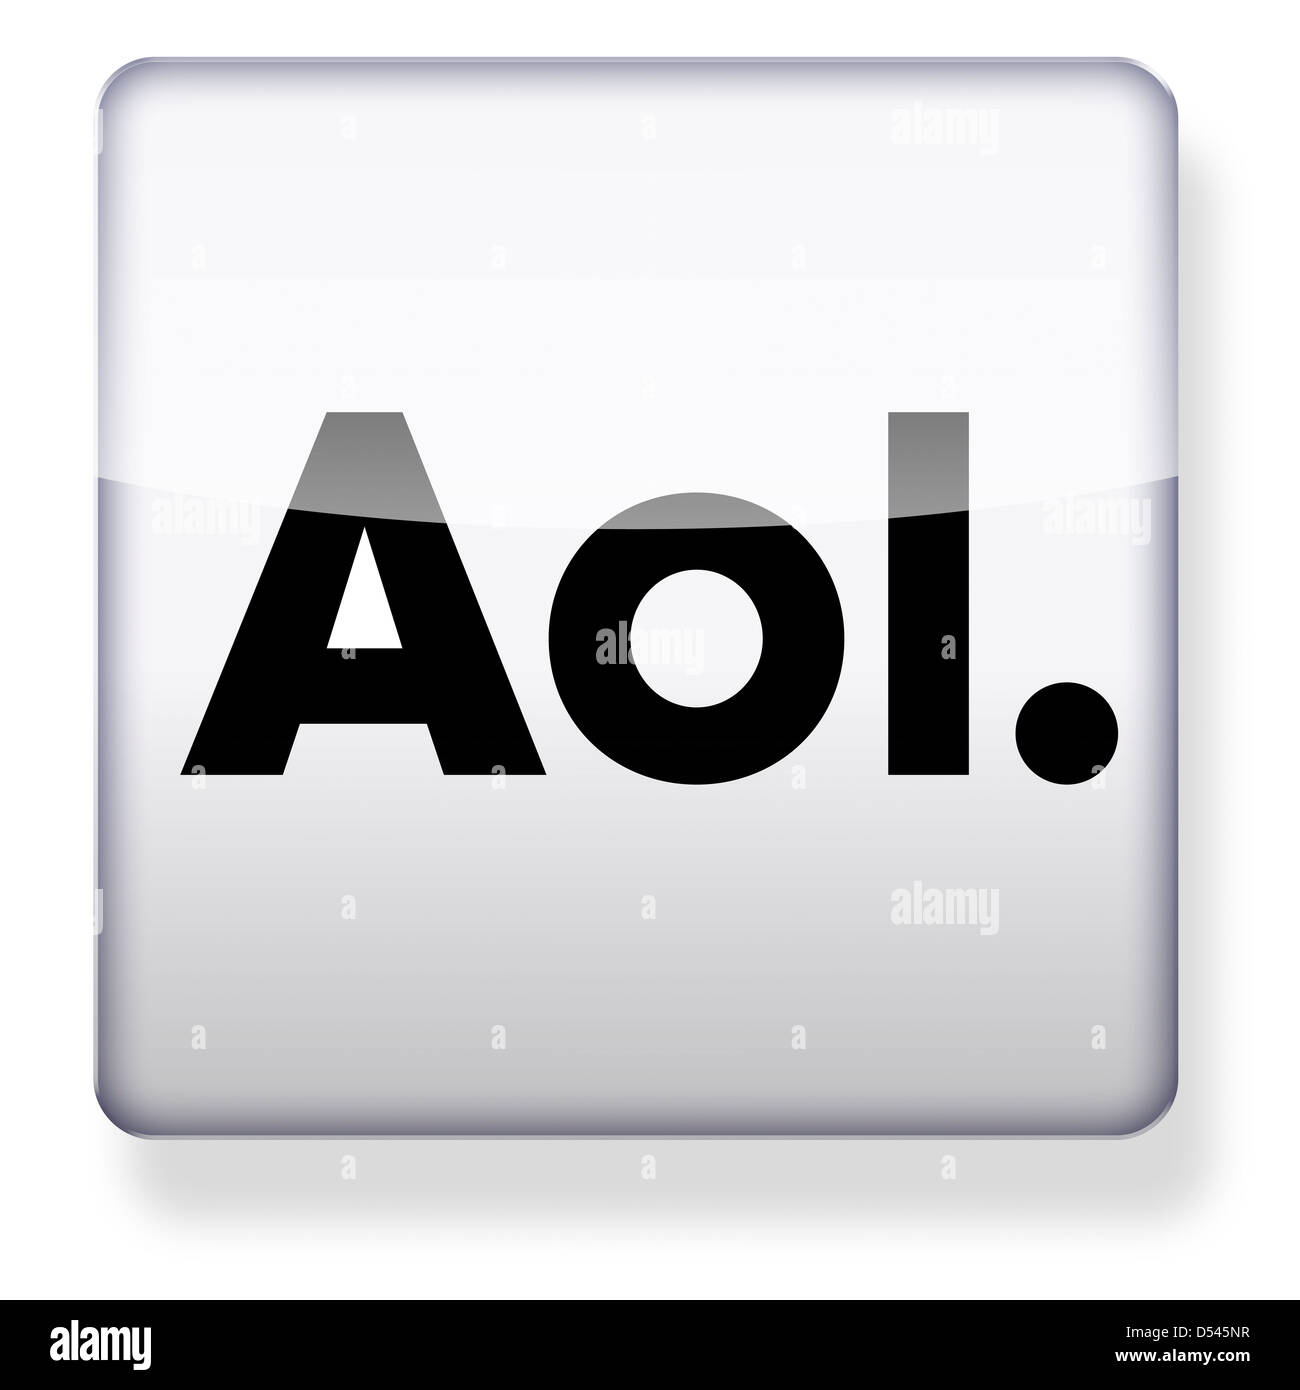 Aol logo as an app icon. Clipping path included. Stock Photo